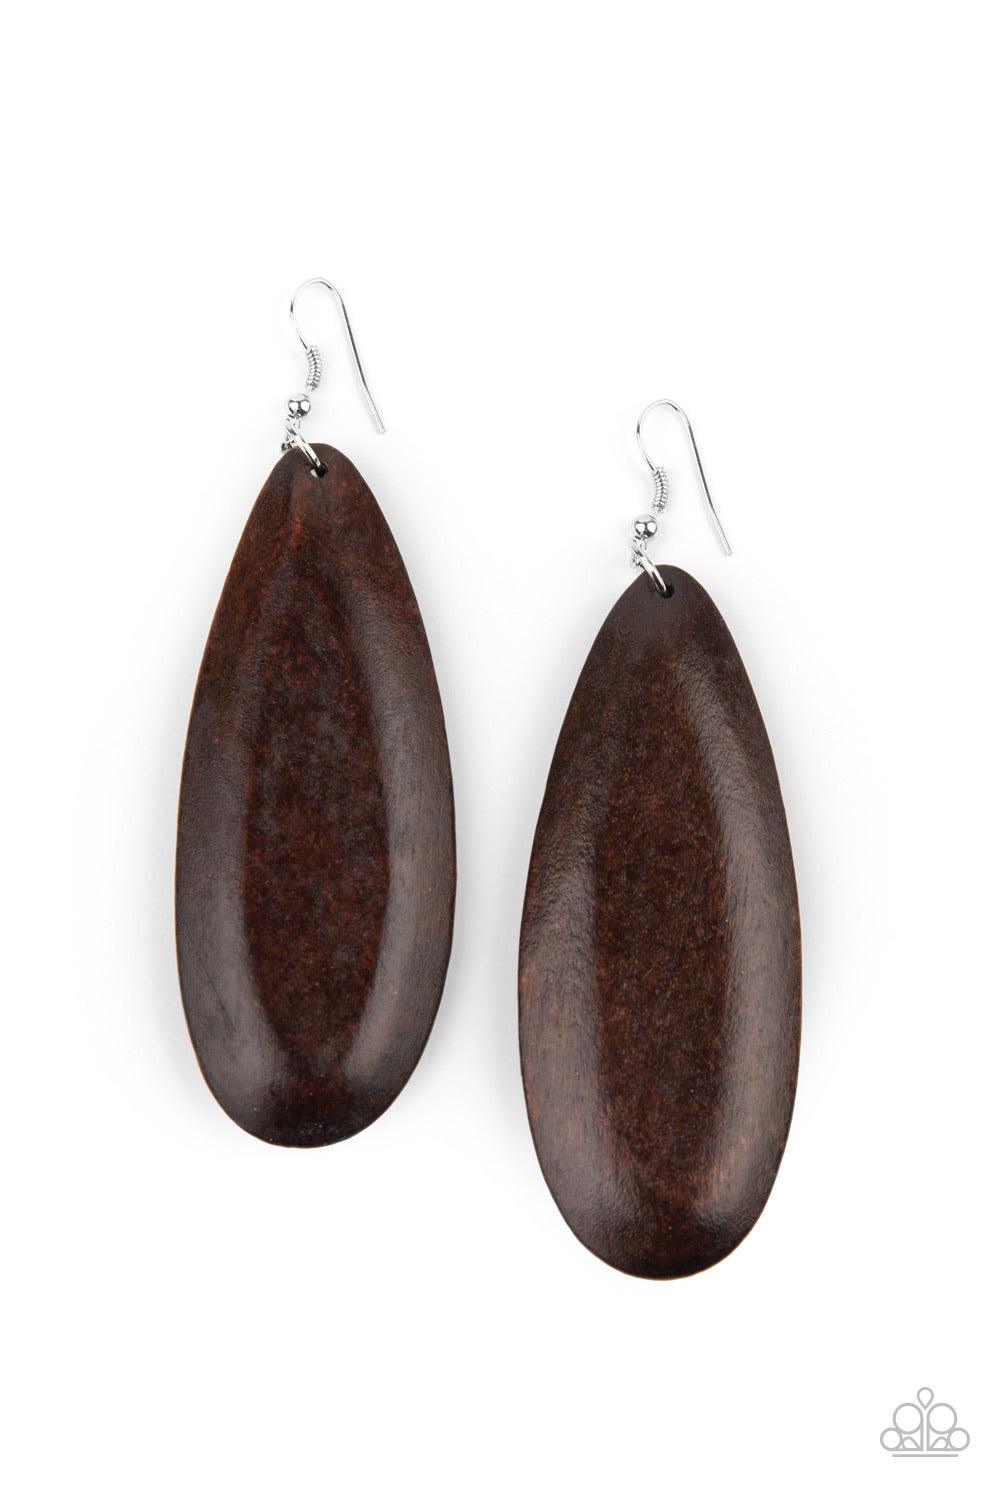 Paparazzi Accessories Tropical Ferry - Brown Painted in a shiny brown finish, an imperfect wooden teardrop swings from the ear for a tropical inspired look. Earring attaches to a standard fishhook fitting. Sold as one pair of earrings. Jewelry